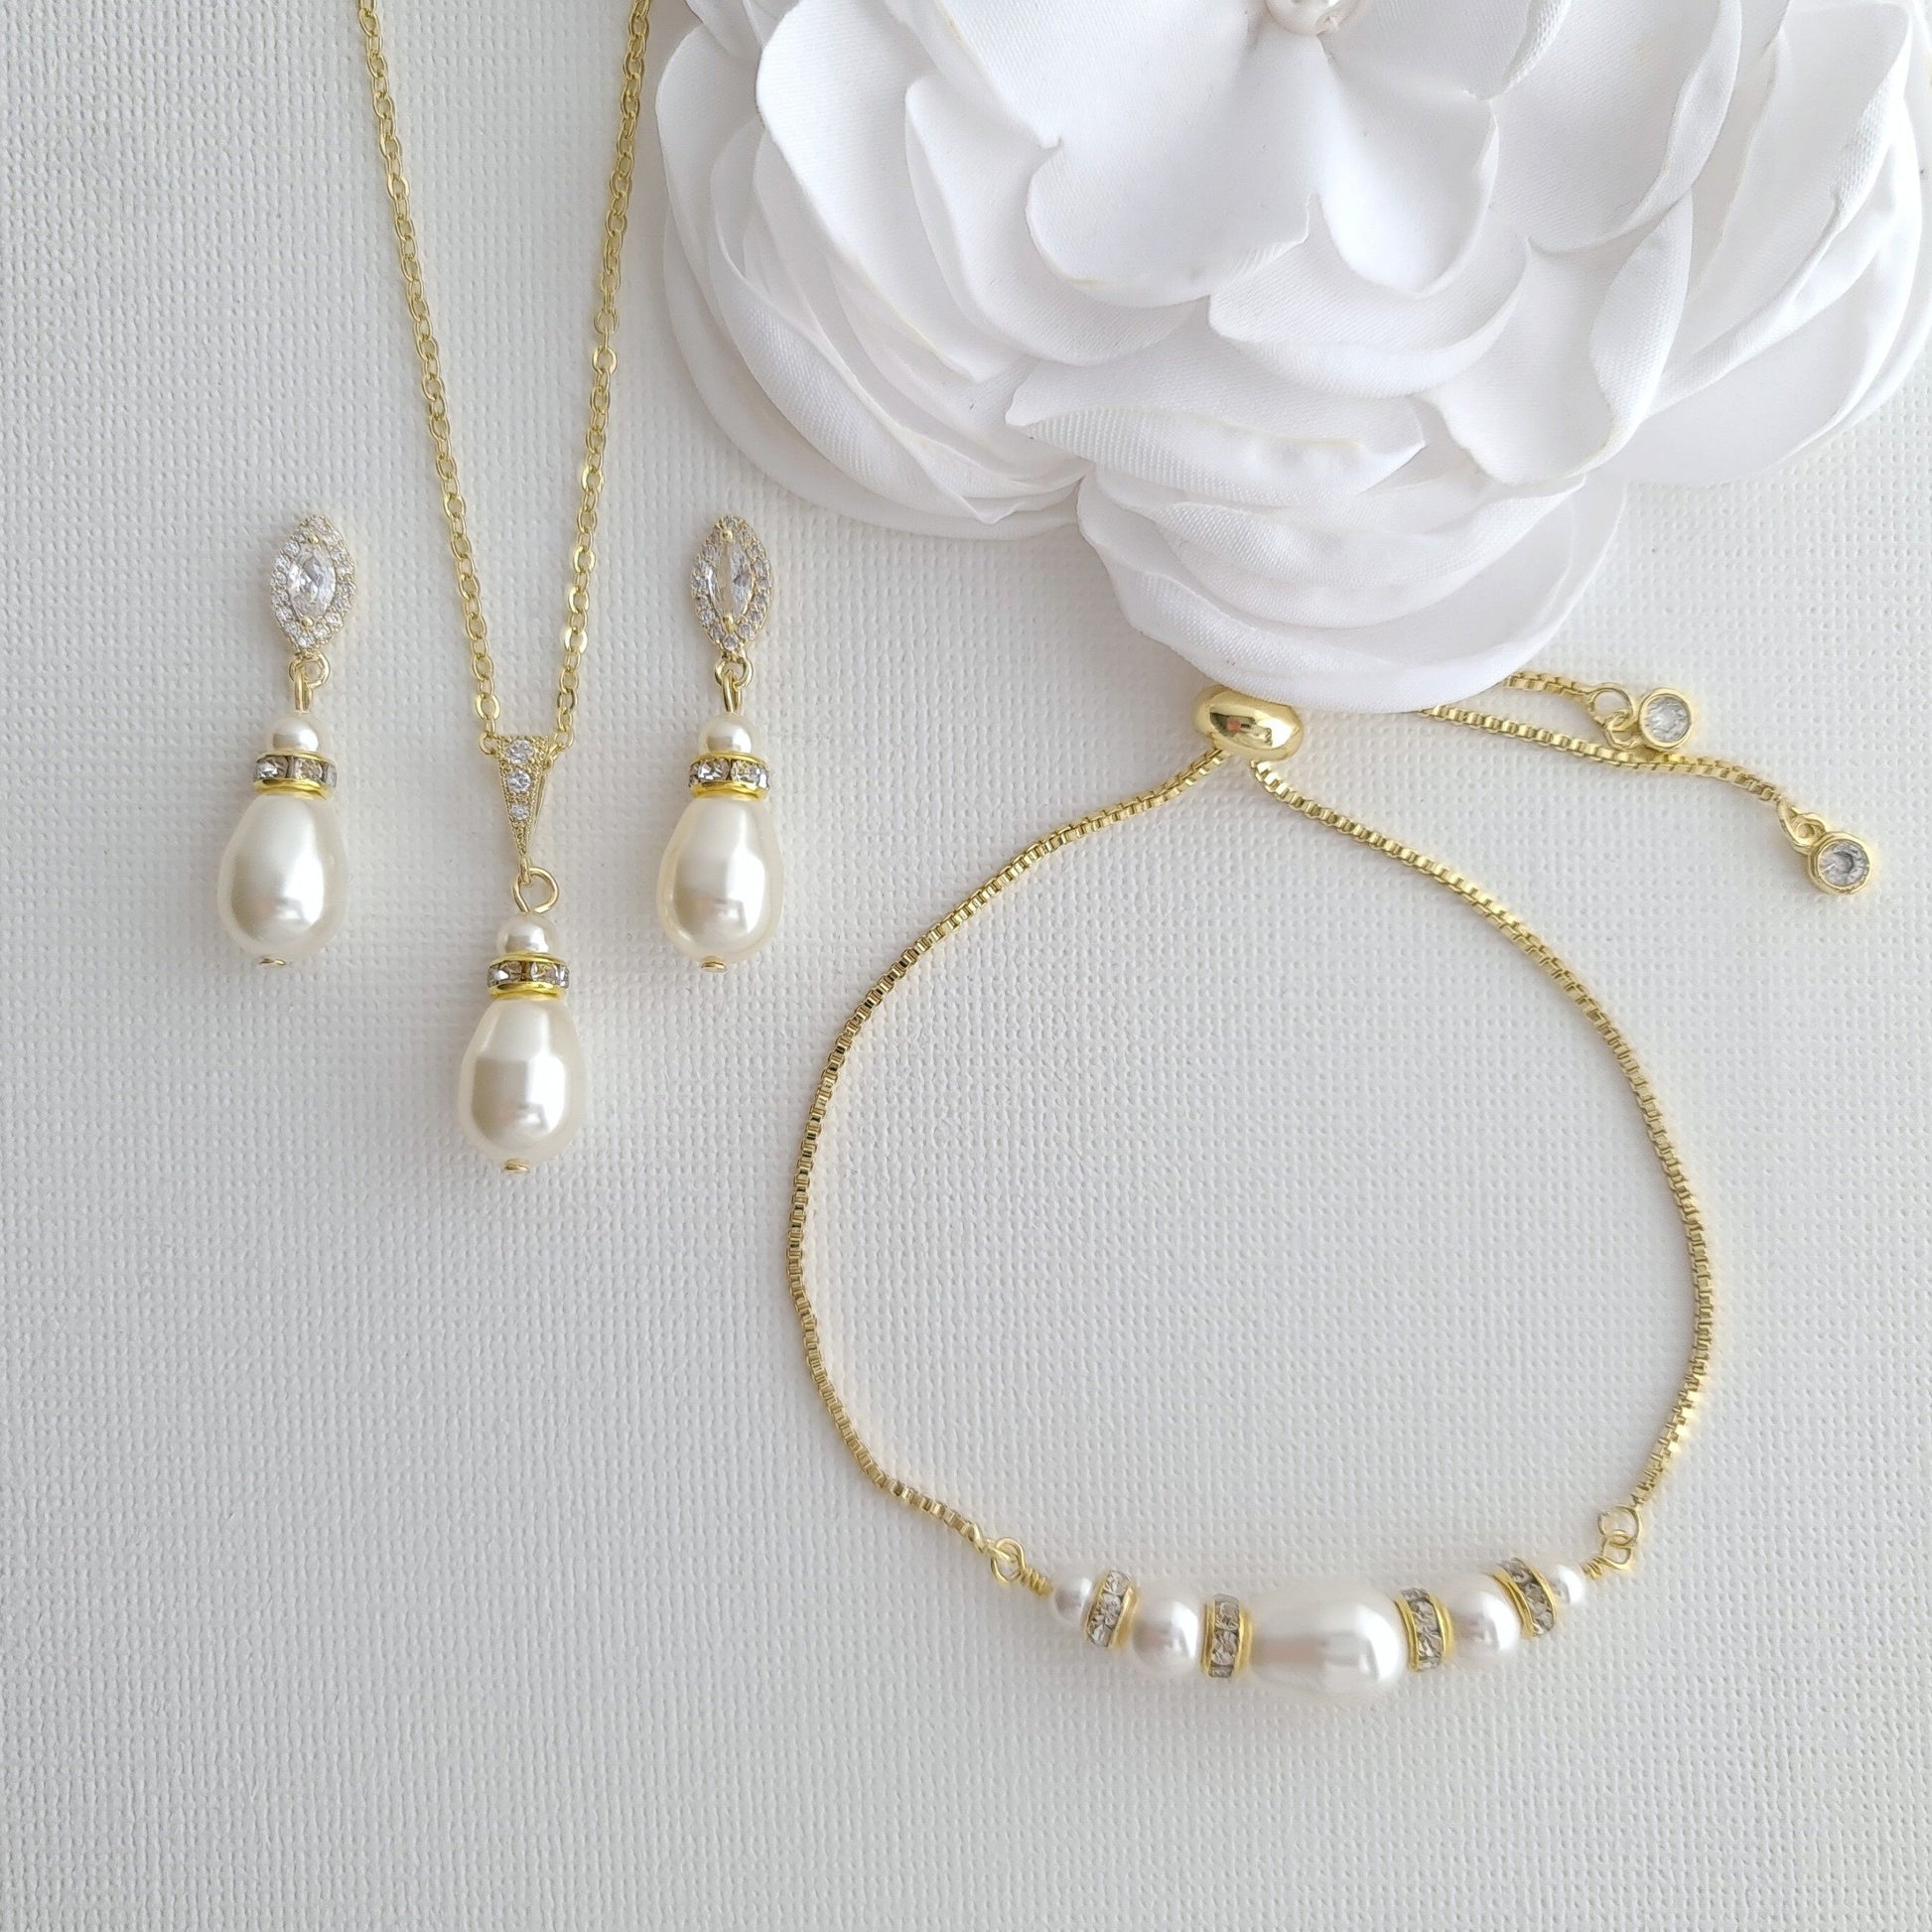 Simple Pearl Wedding Jewelry Set with Pearl Earring,Necklace,Bracelet for Brides-Ella - PoetryDesigns